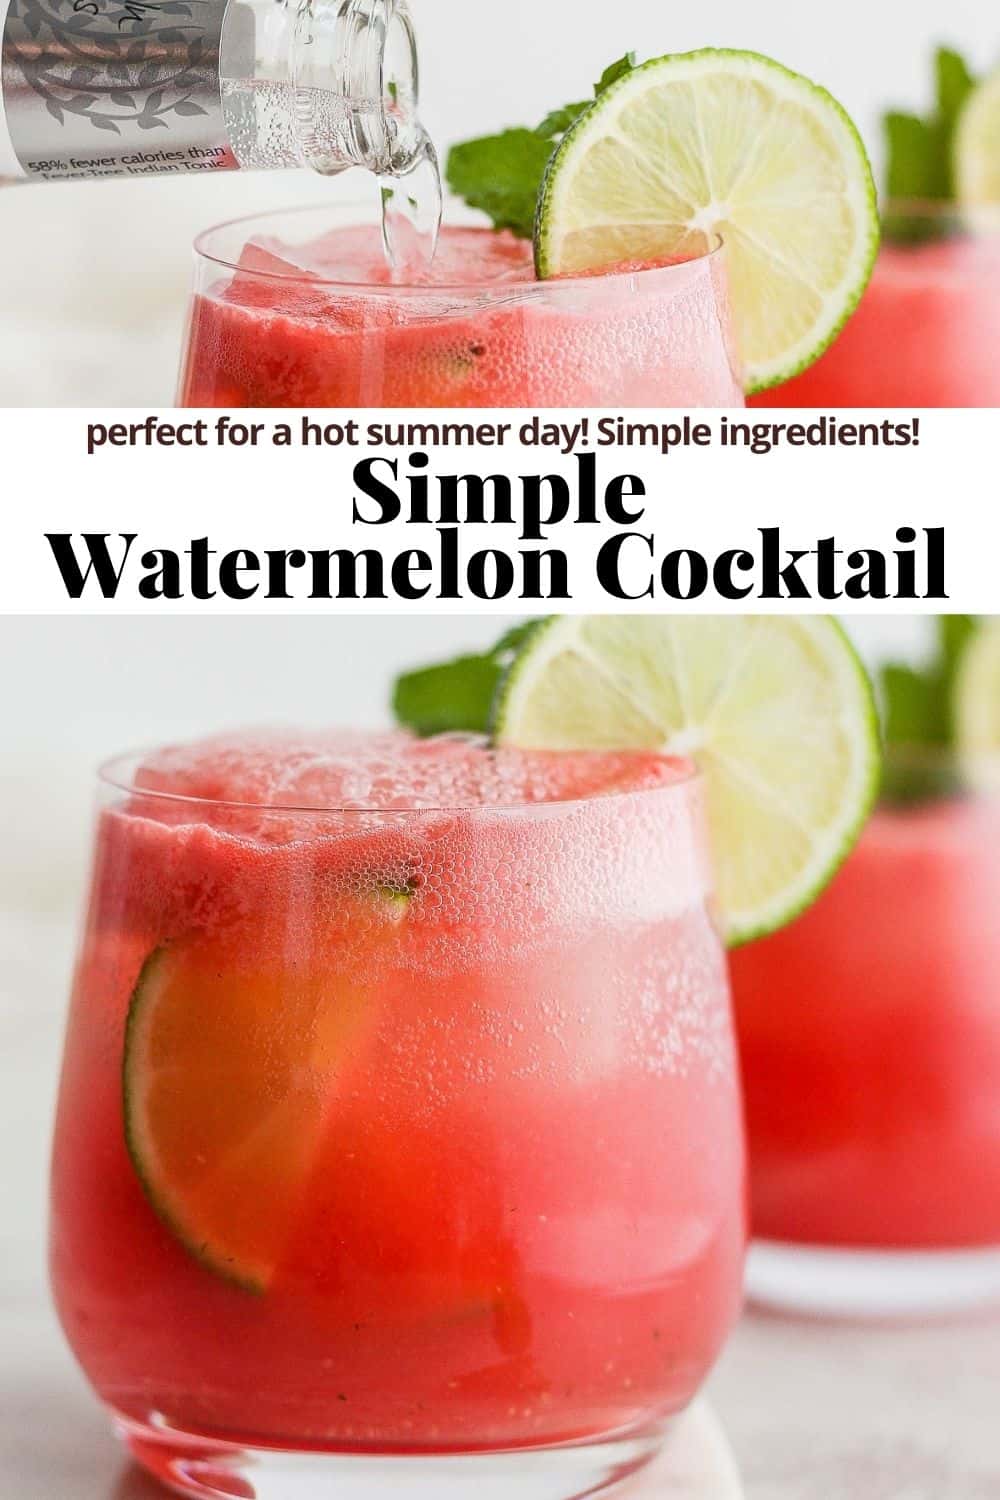 Pinterest image for a simple watermelon cocktail.